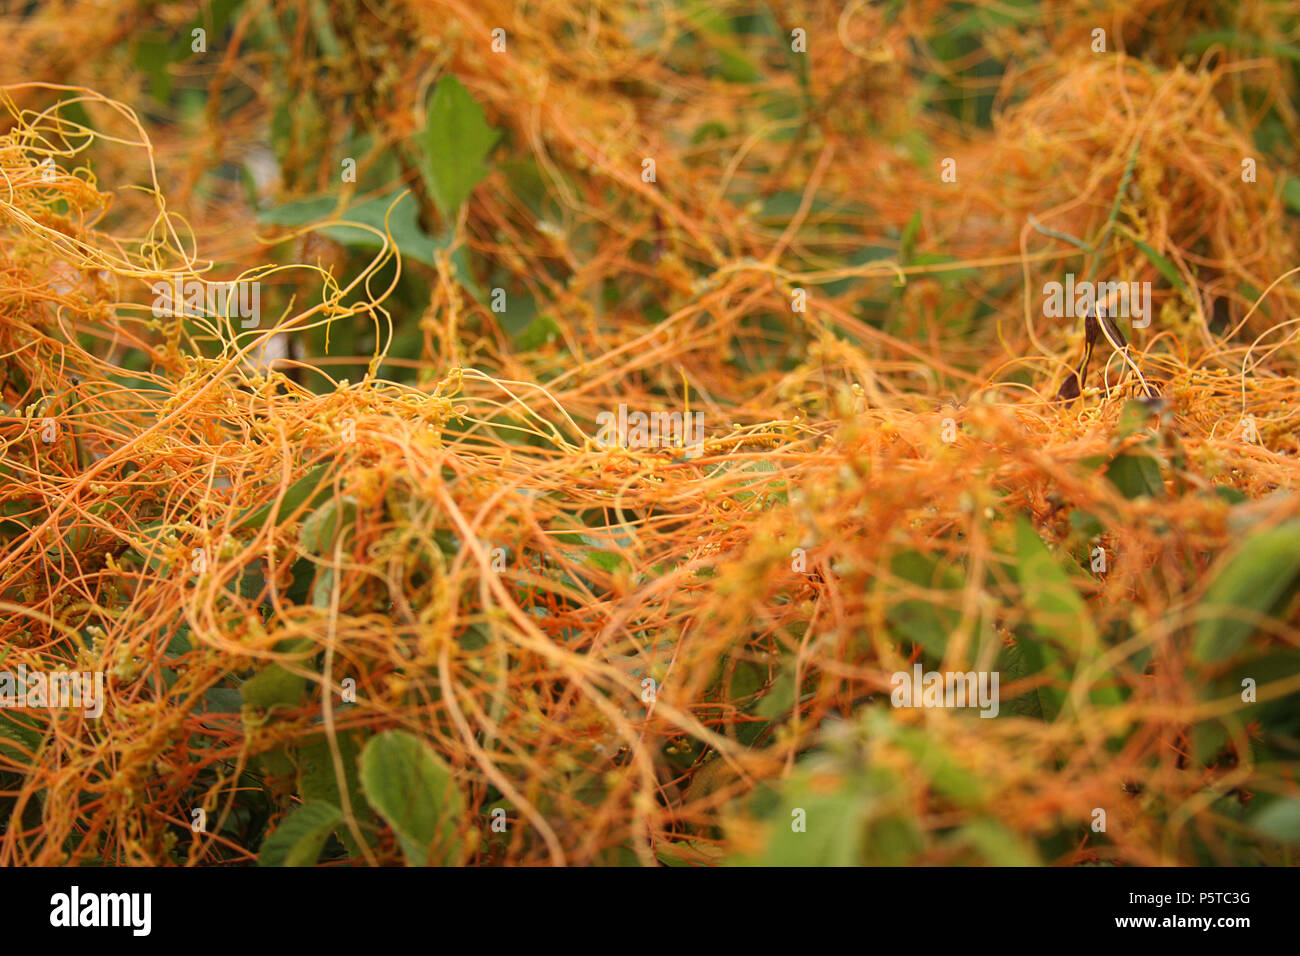 Cuscuta (dodder) plant wrapped around other plants Stock Photo